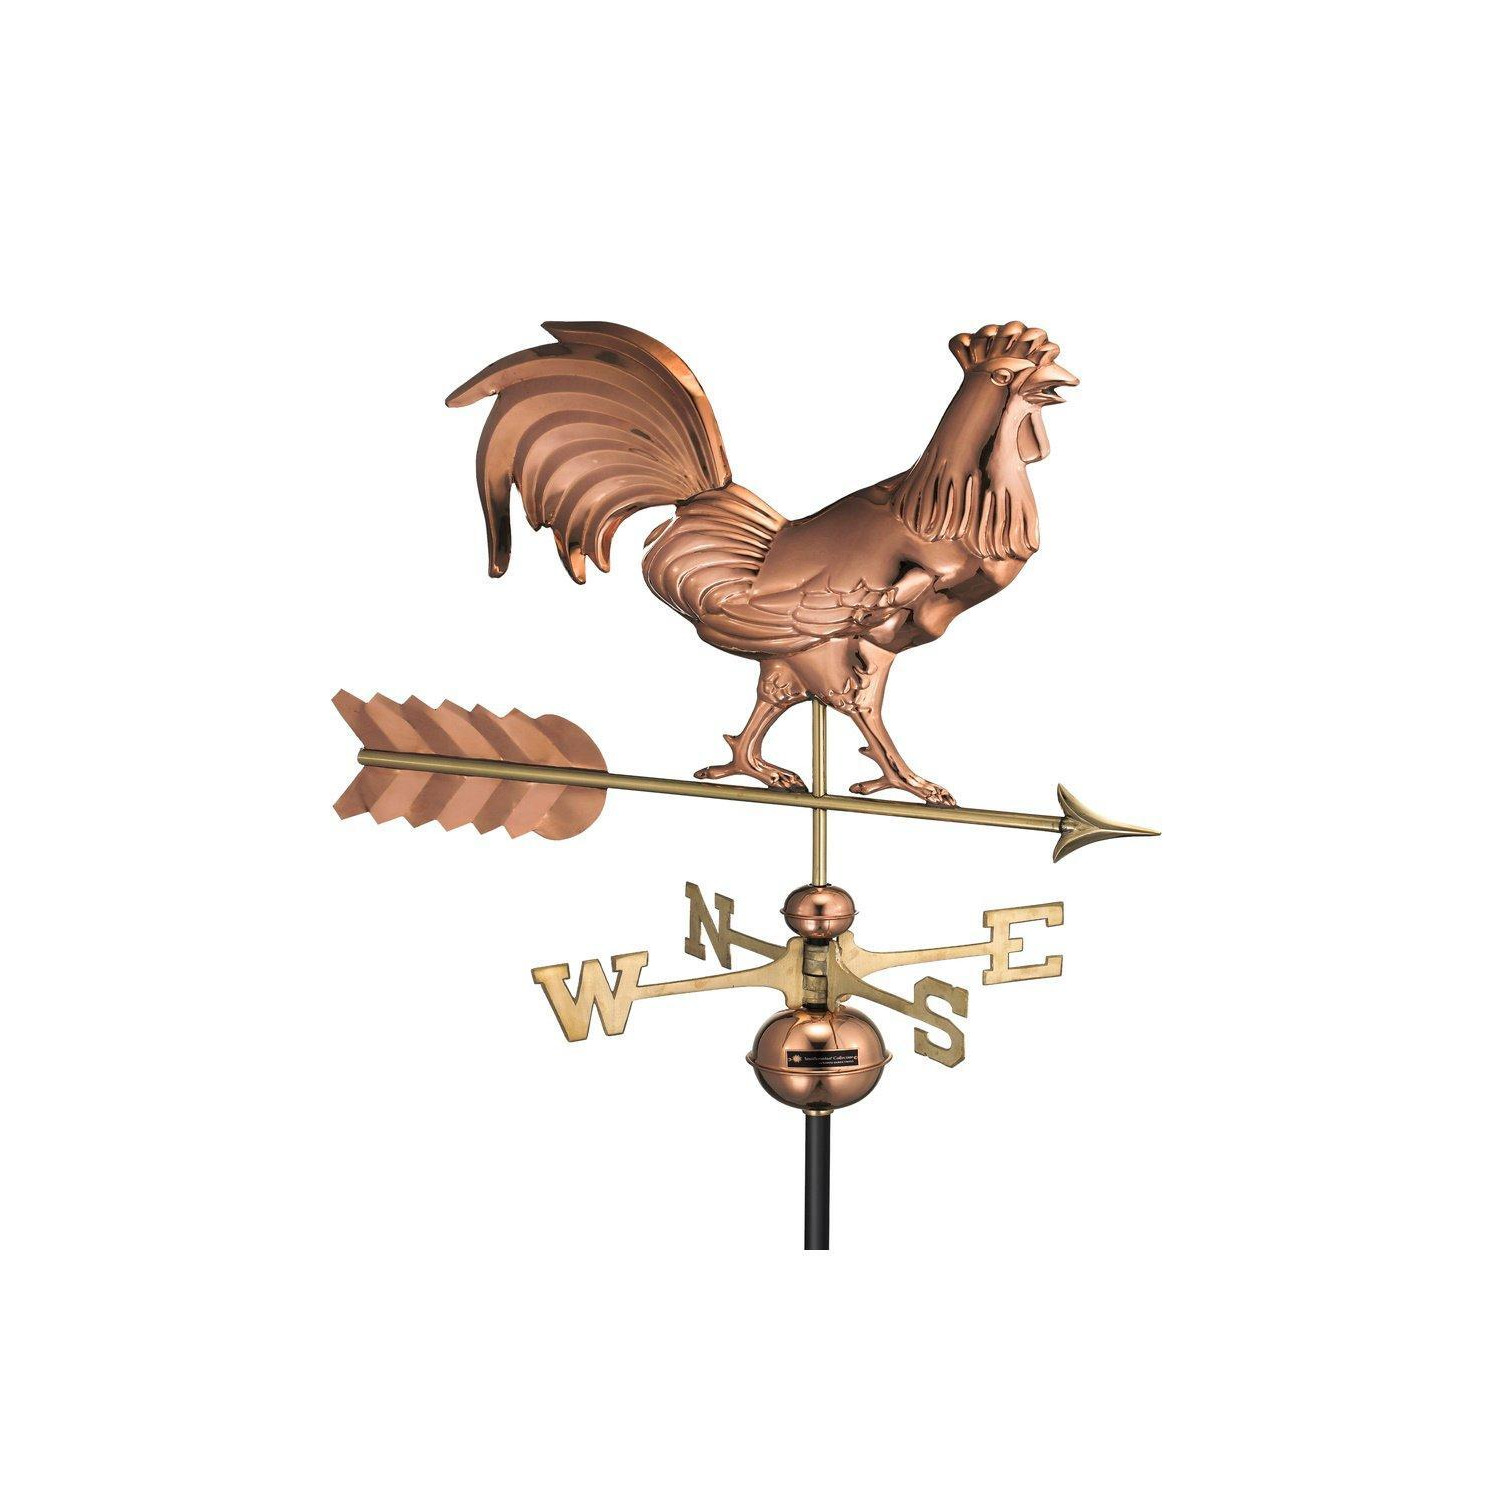 Rooster Farmhouse Copper Weathervane - image 1